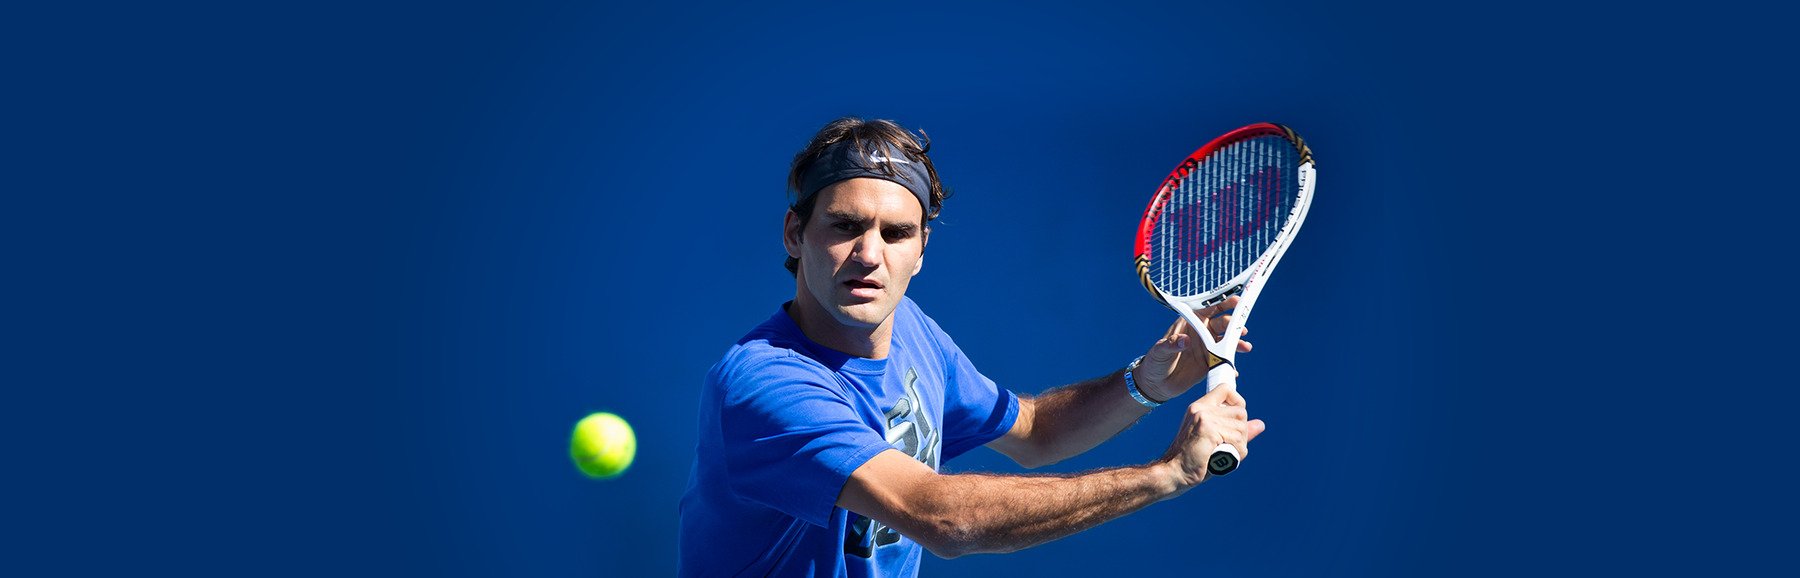 These photos follow the career of tennis great Roger Federer : The